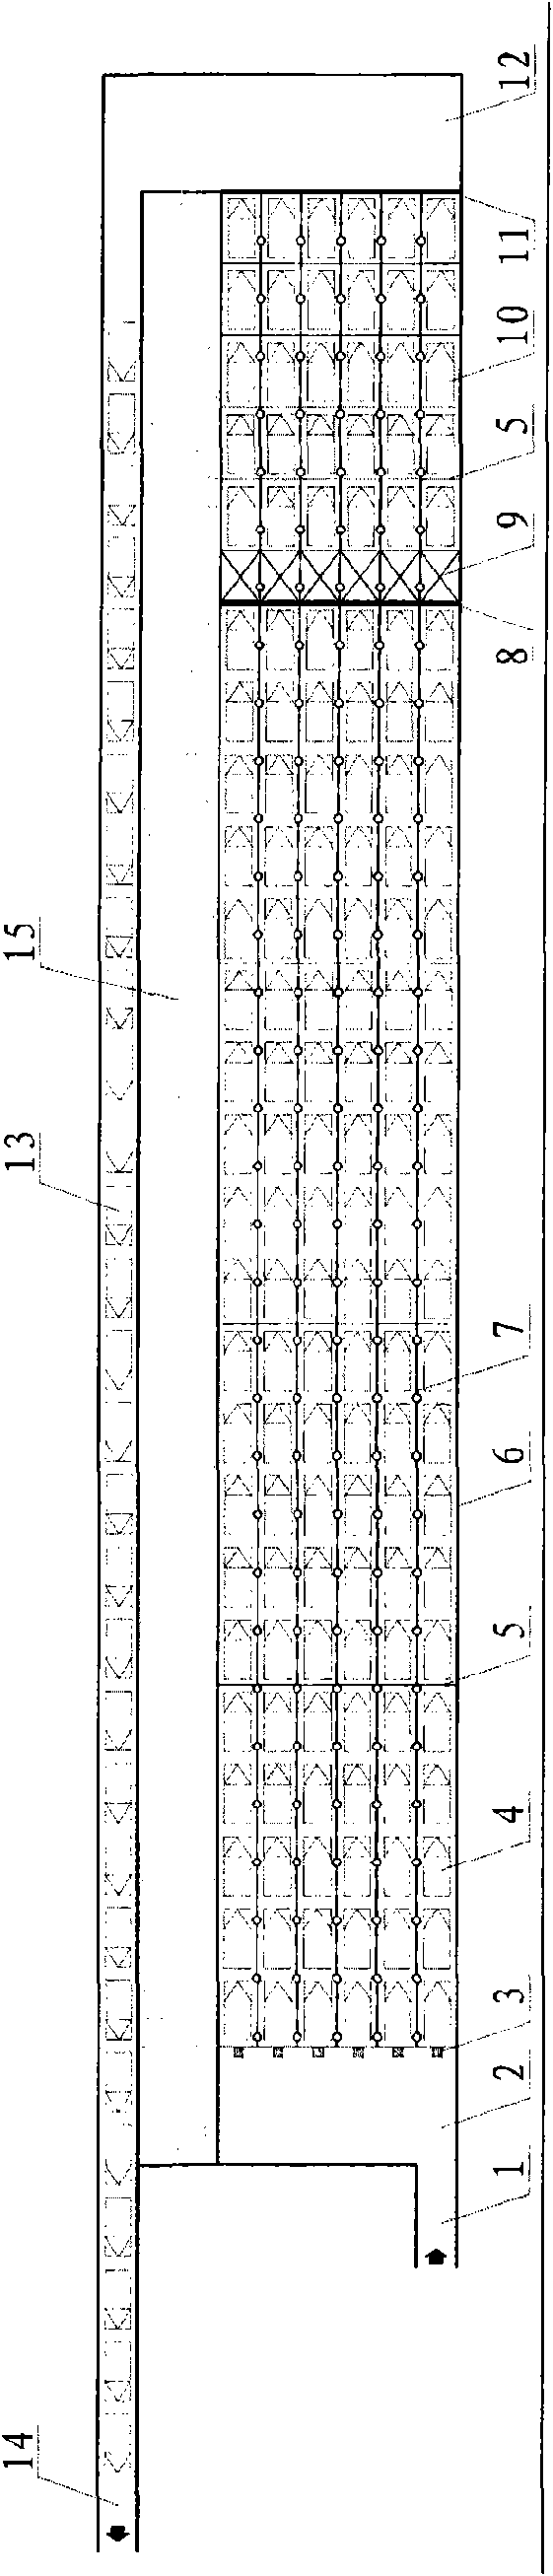 Taxi lining area setting controlling method